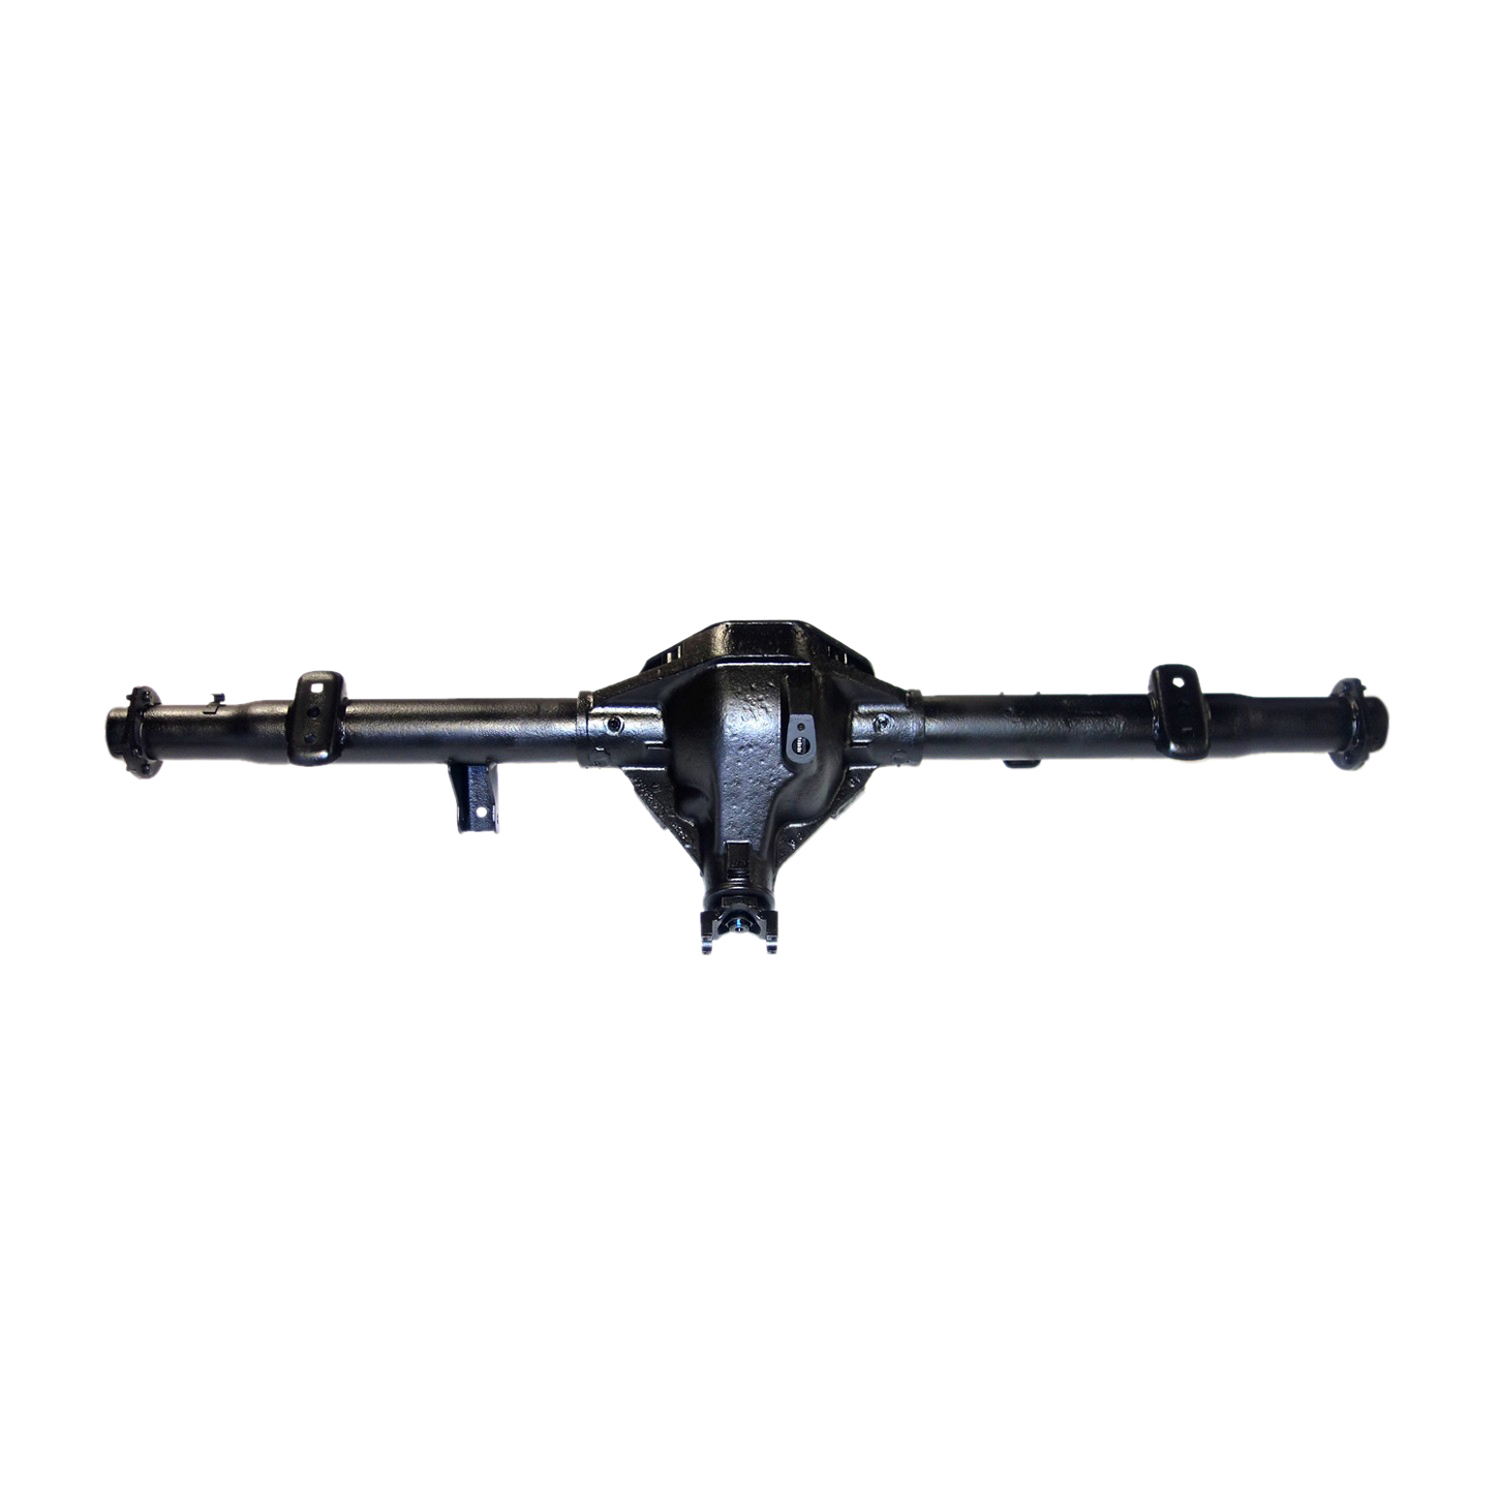 Remanufactured Axle Assy Chy 9.25" 94-99 D1500 3.55 , 4x4 w/ Staggered Shocks, Posi LSD